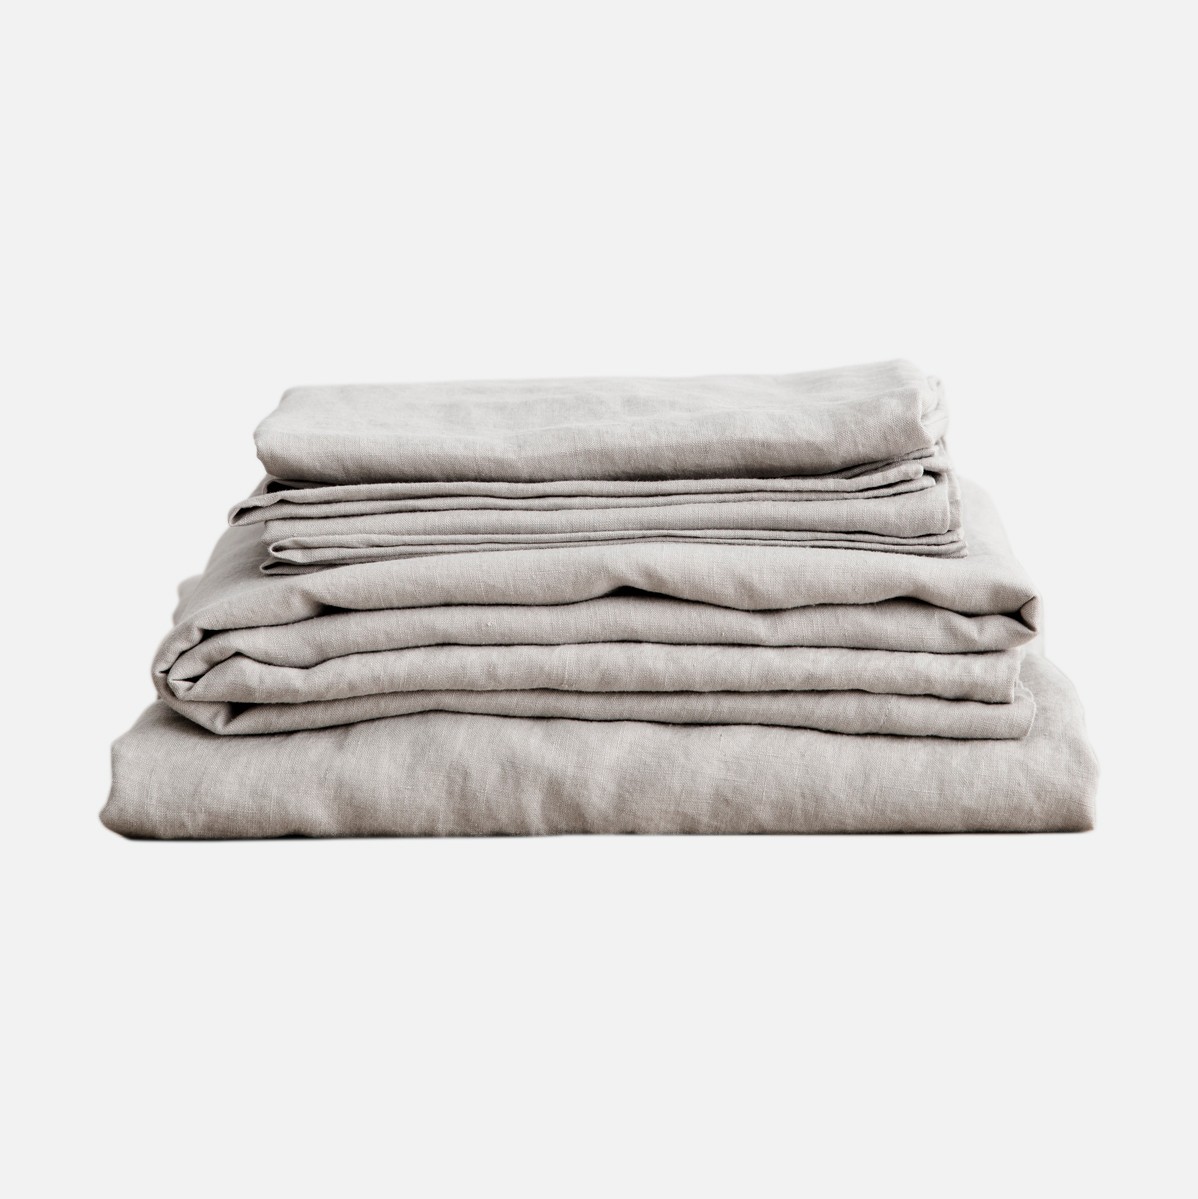 a stack of linen sheets folded on top of each other